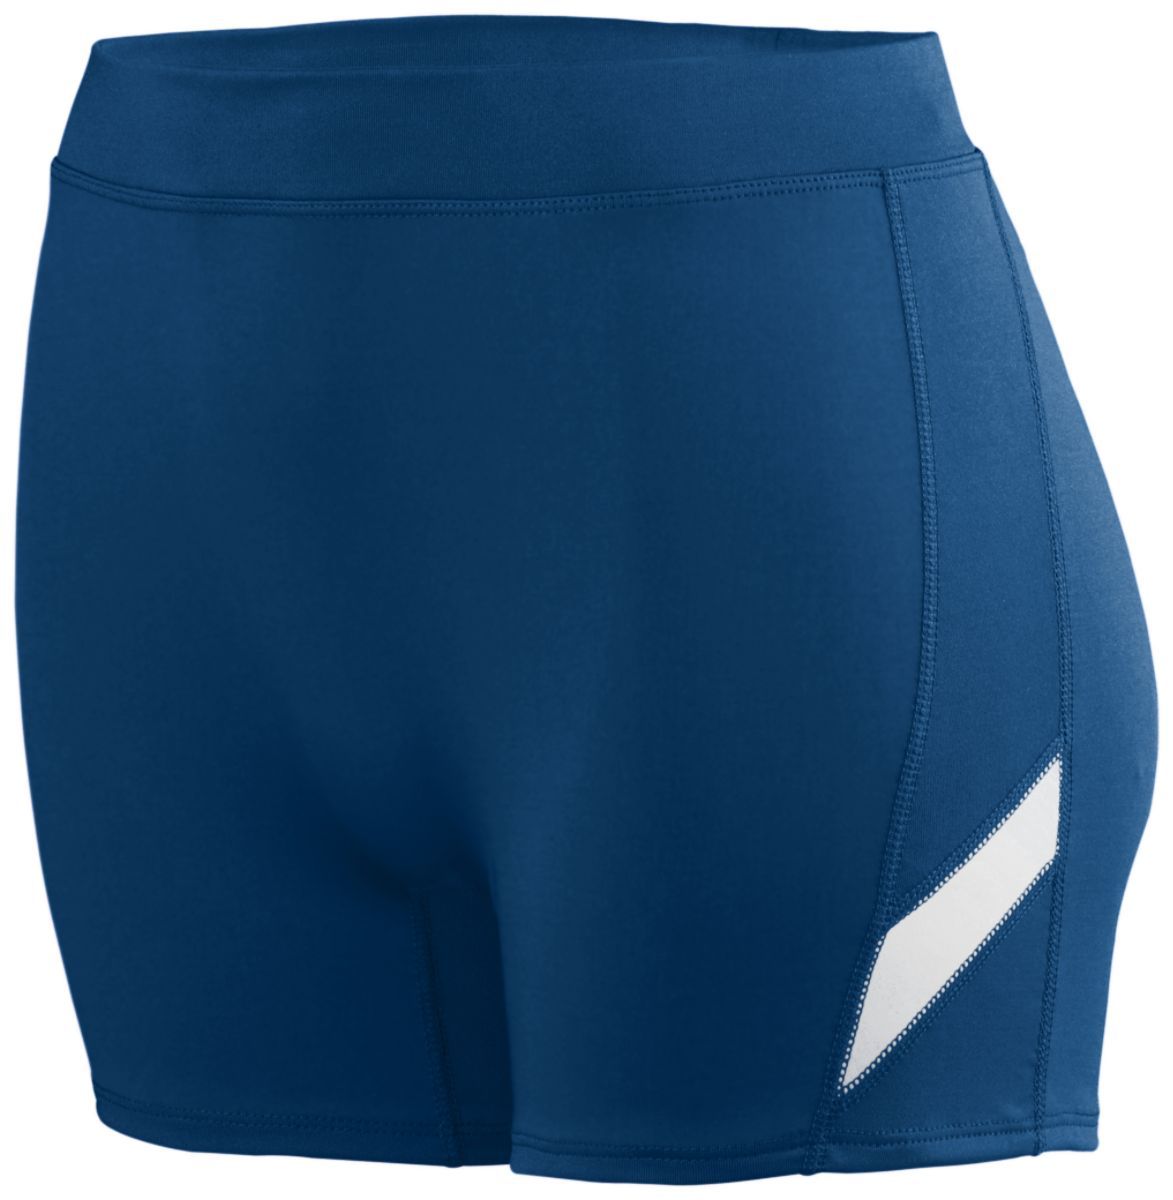 Augusta Sportswear Ladies Stride Shorts in Navy/White  -Part of the Ladies, Ladies-Shorts, Augusta-Products, Volleyball product lines at KanaleyCreations.com